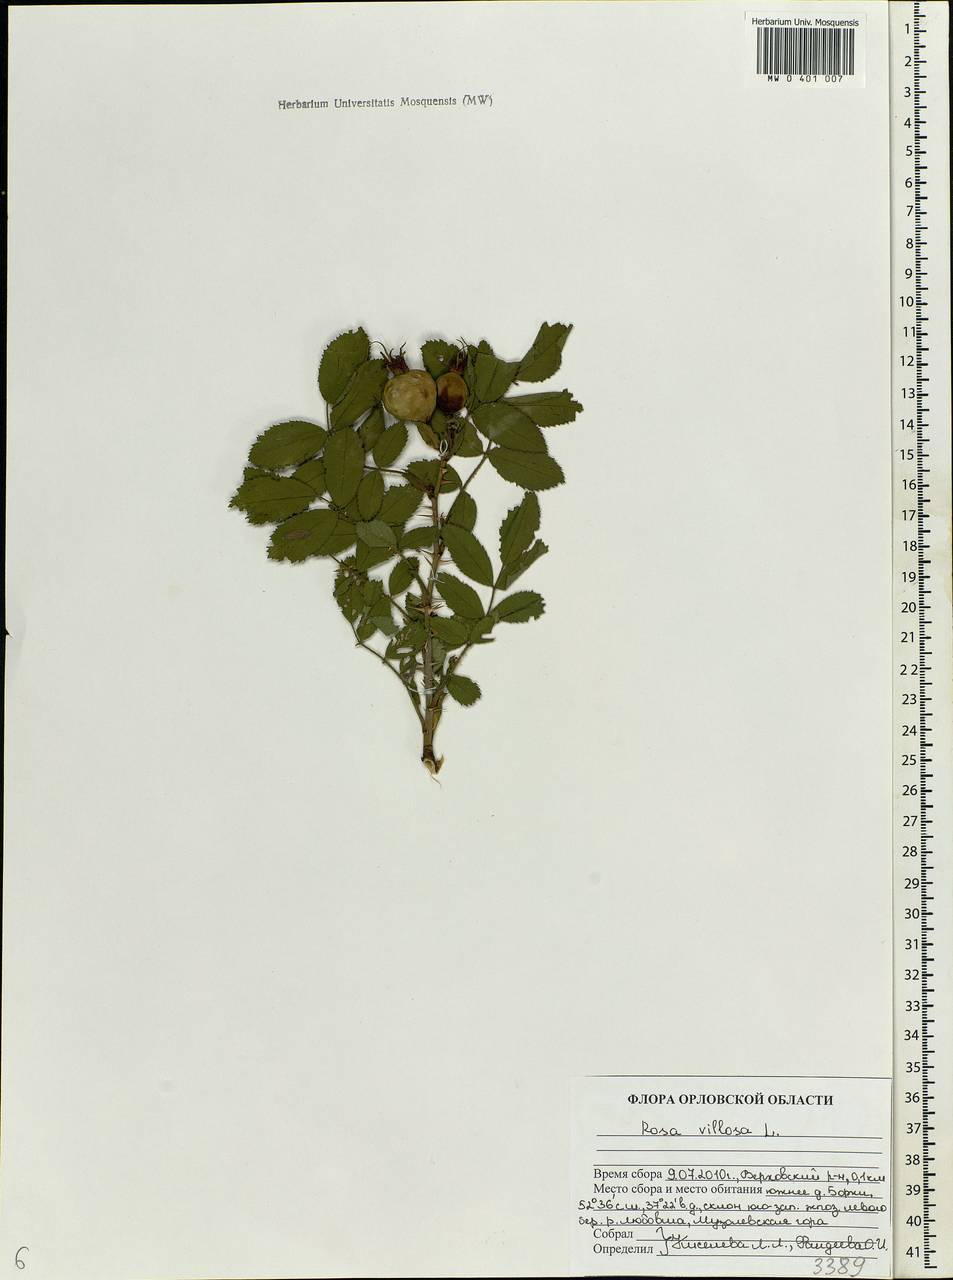 Rosa villosa L., Eastern Europe, Central forest-and-steppe region (E6) (Russia)